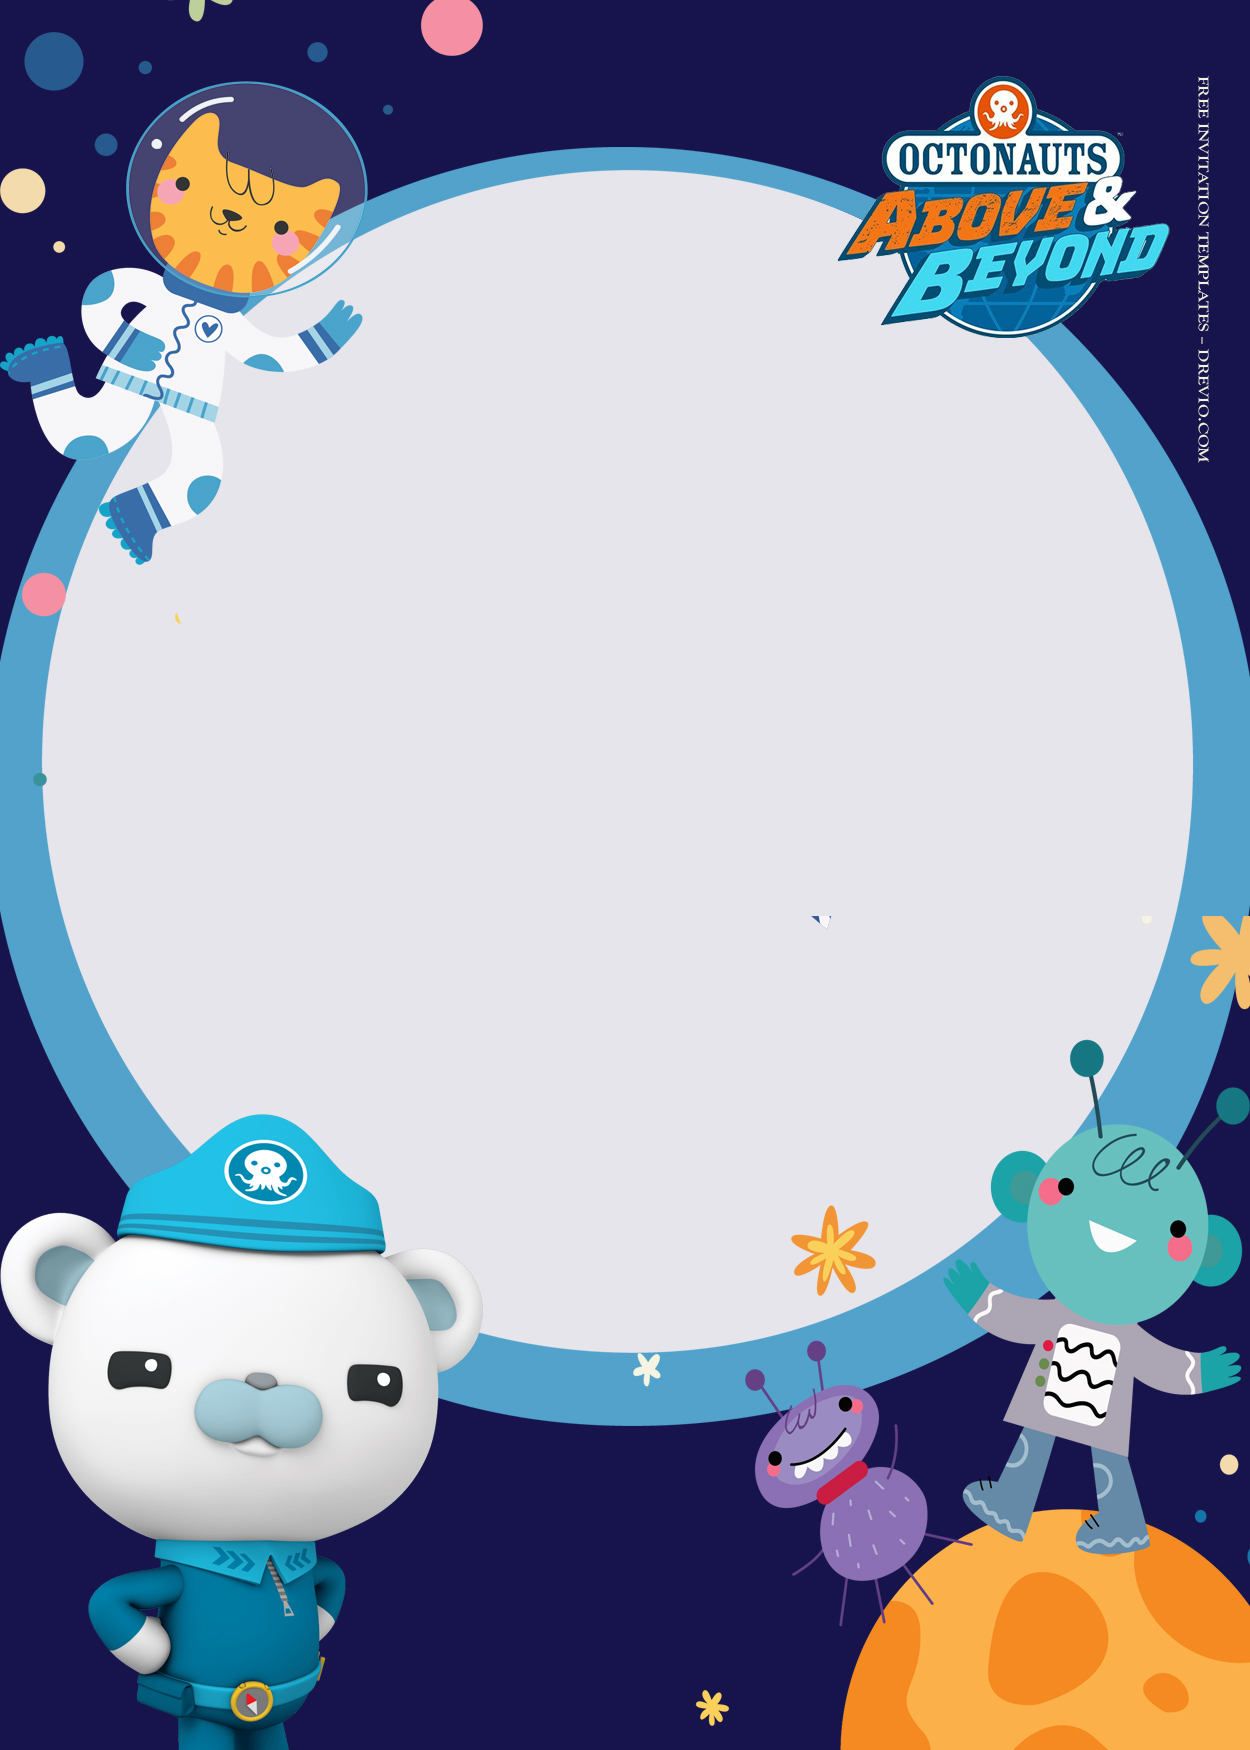 11+ Octonauts Above And Beyond Birthday Invitation Templates Two